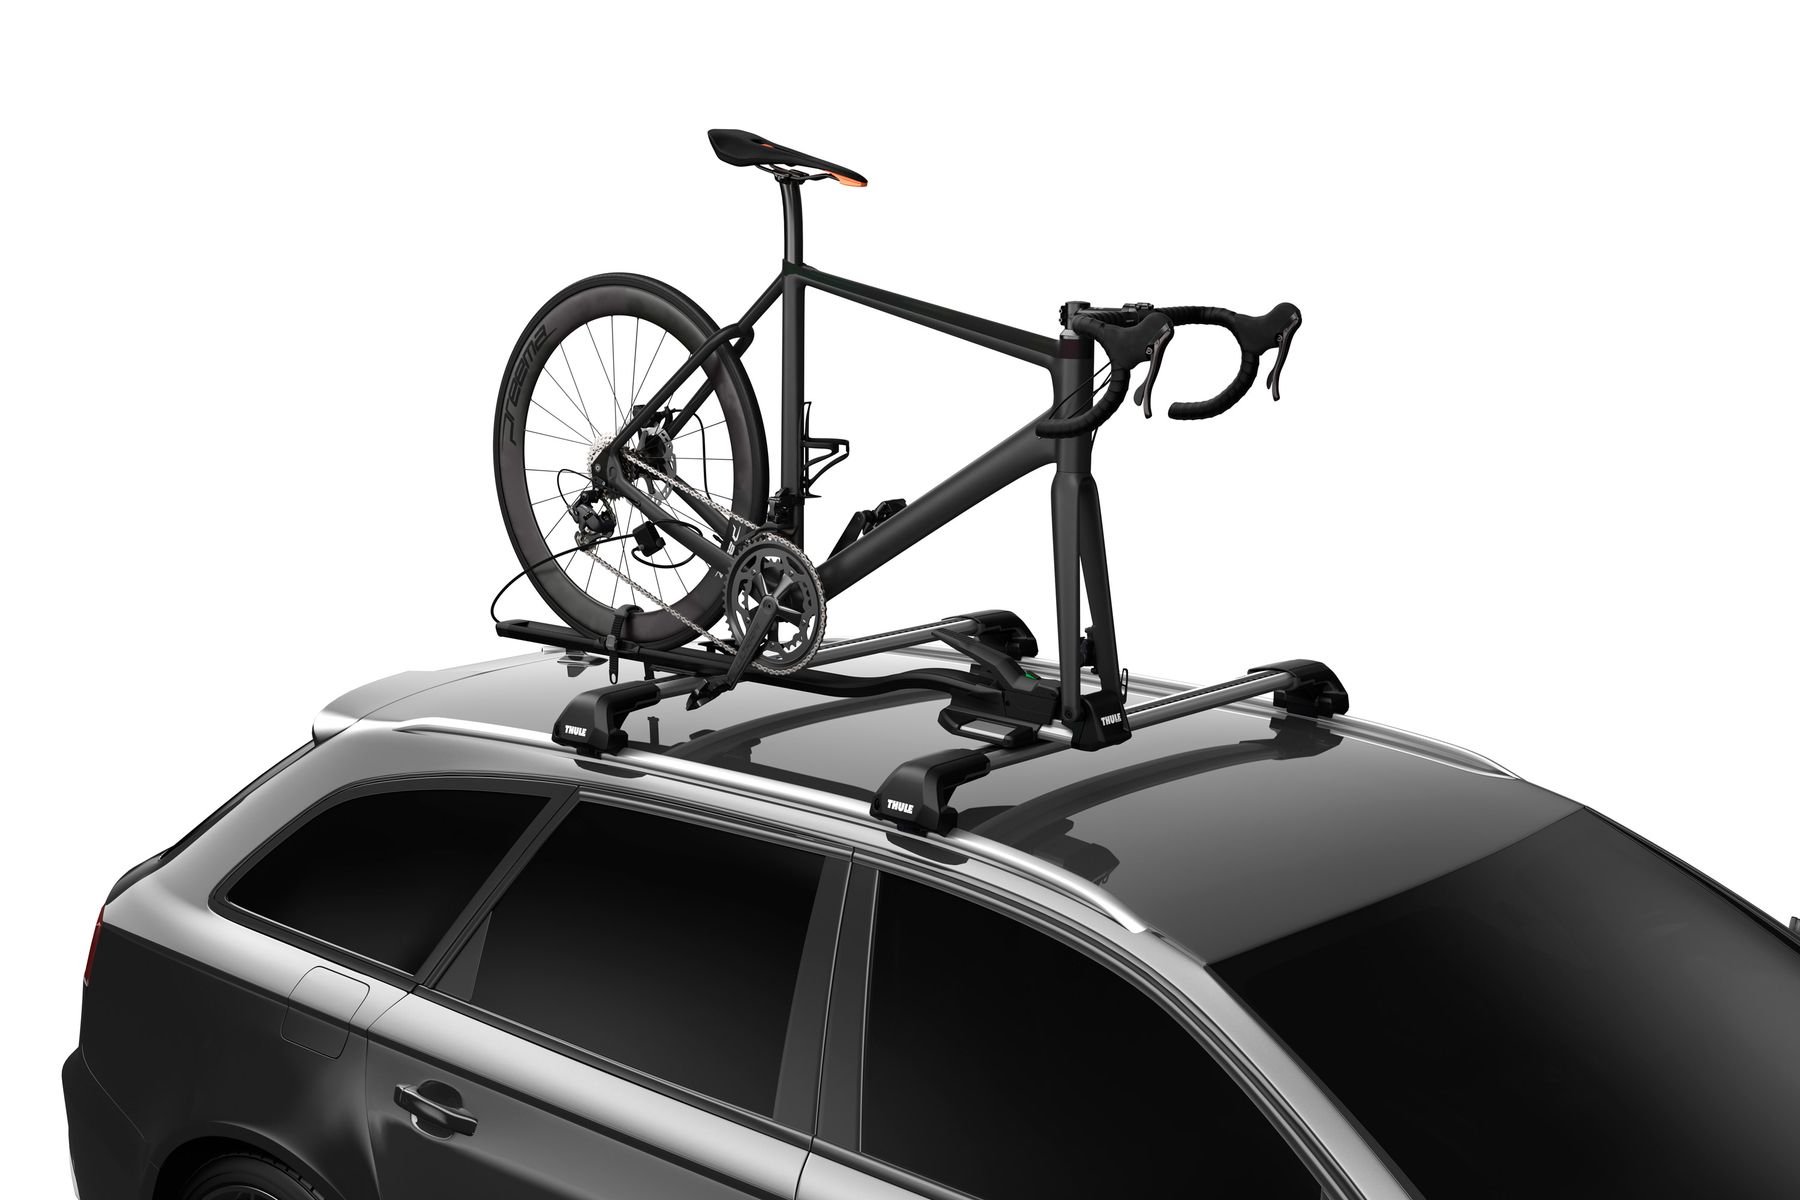 Alloy Bike Bicycle Car Roof Rack Carrier Quick-Release Fork Lock Mounted Racks 